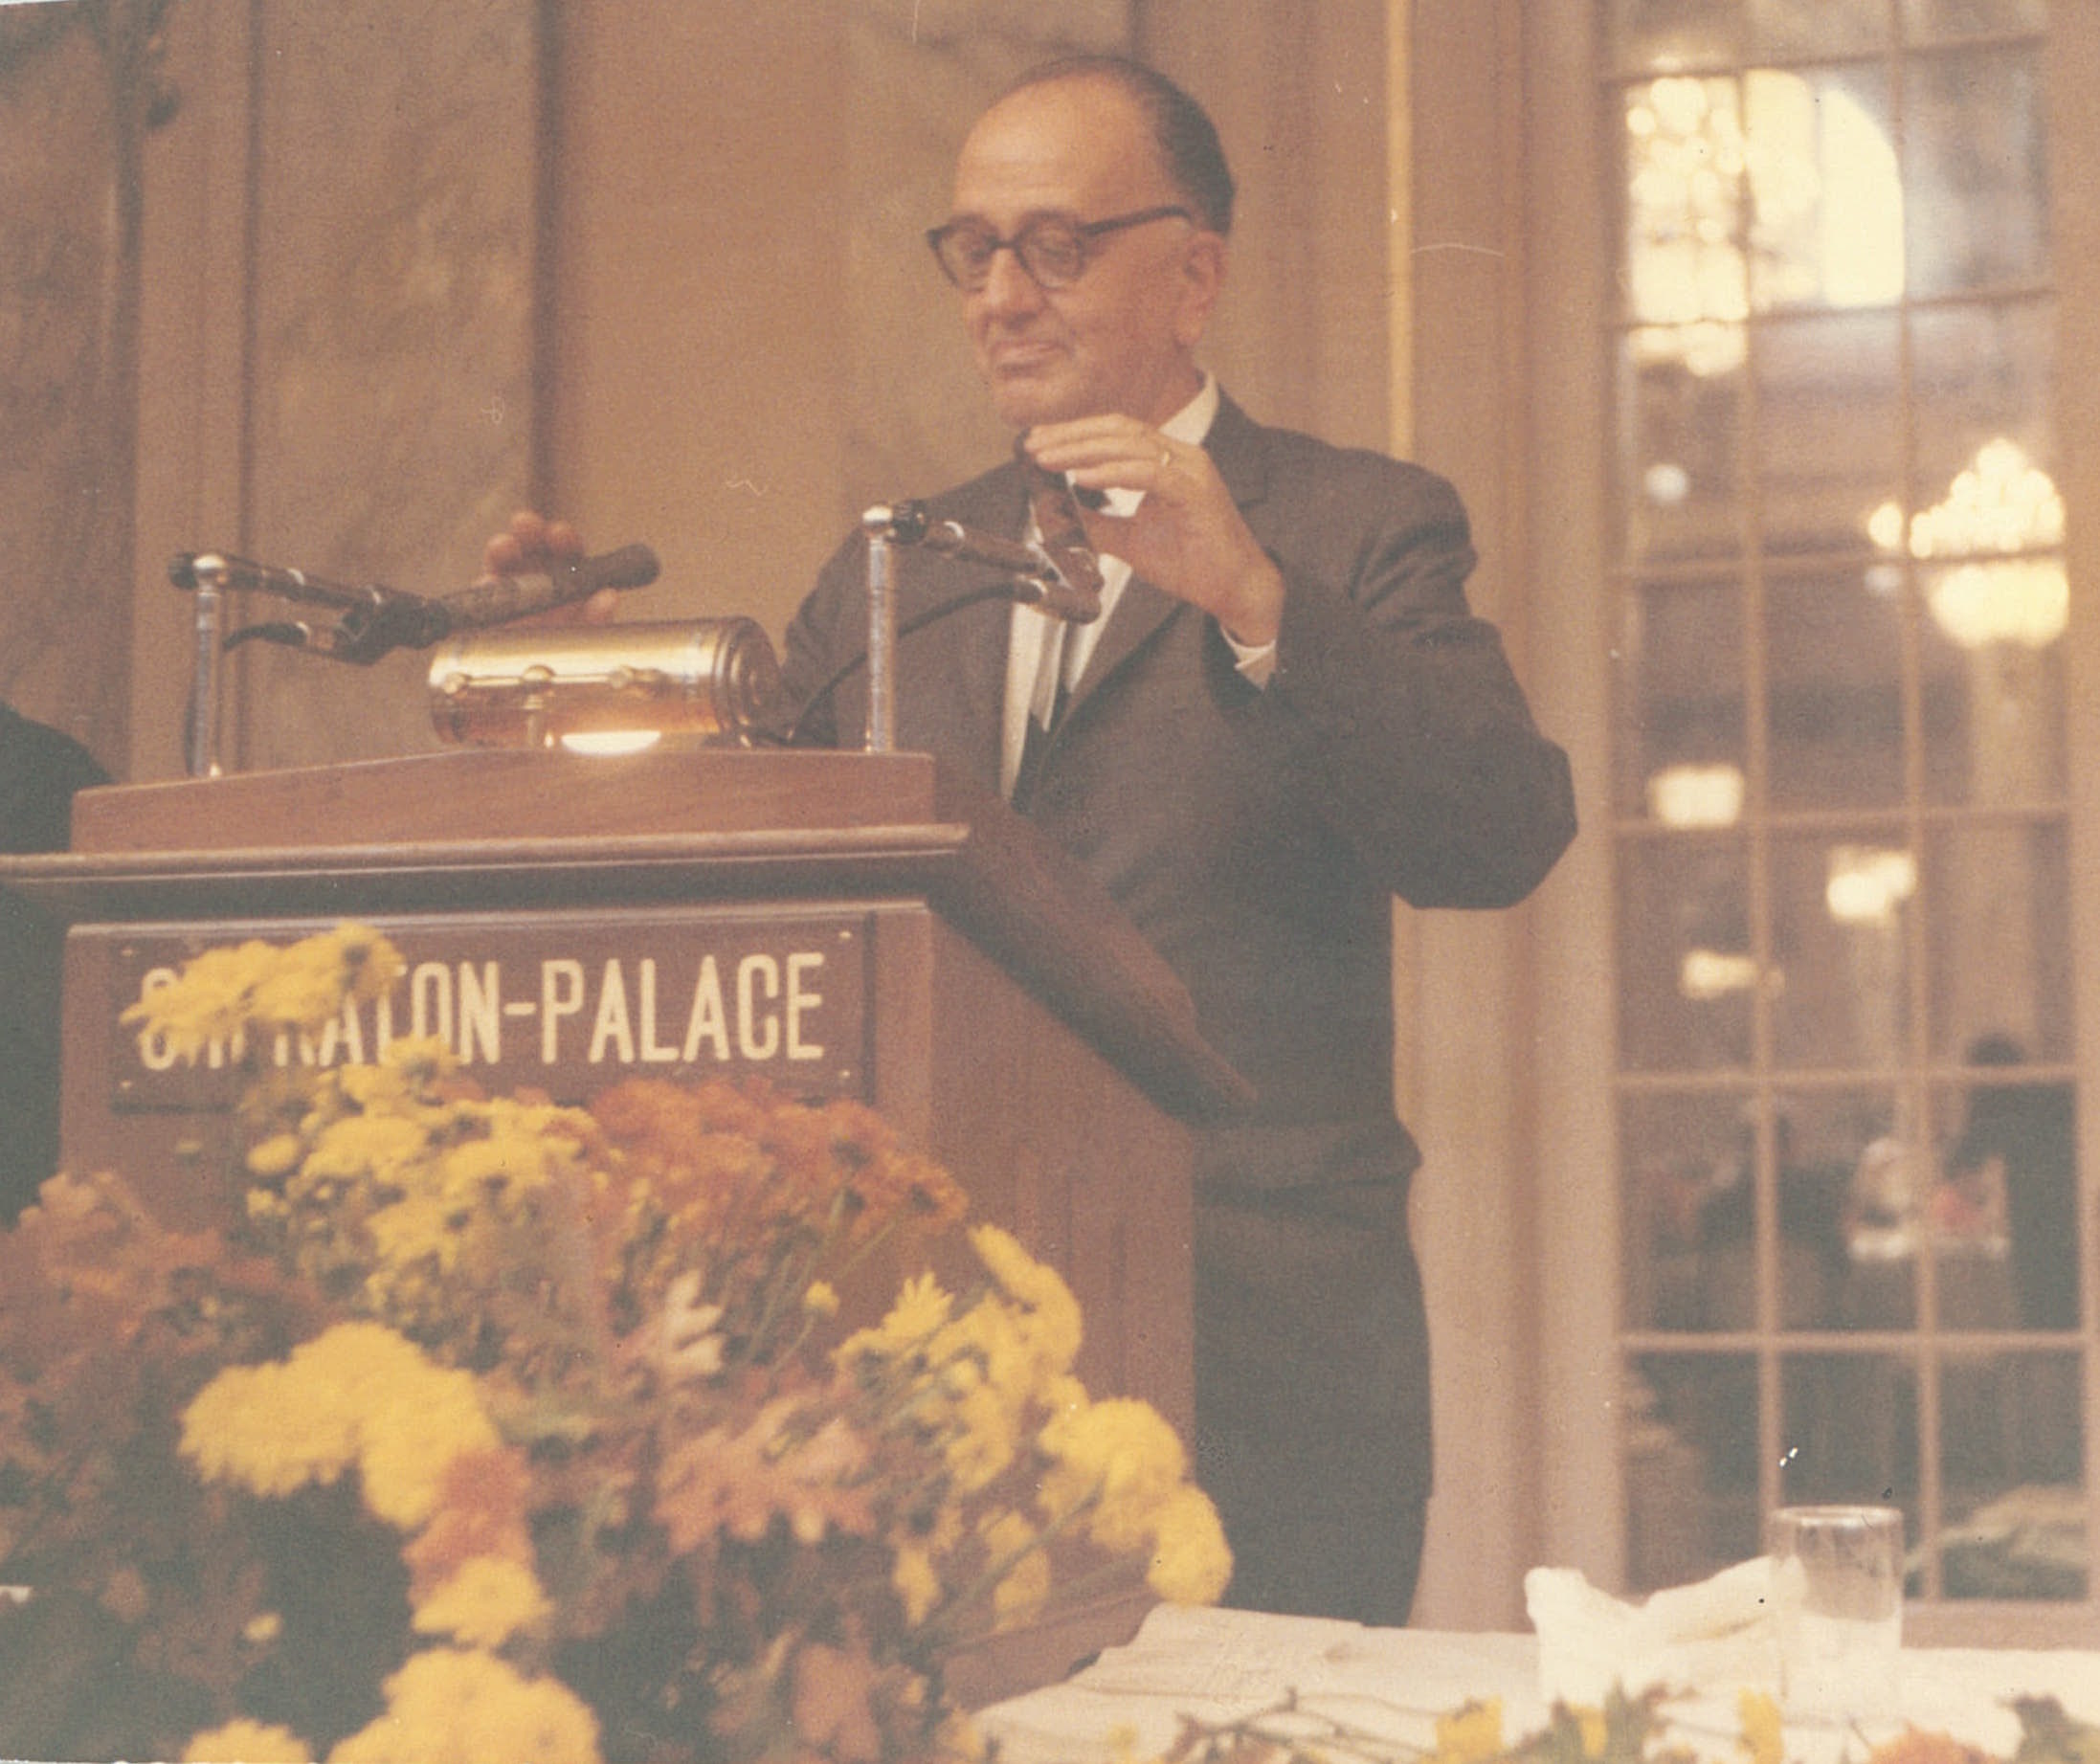 Ranieri giving a lecture on Dante at Sheraton Palace in San Francisco (1965)